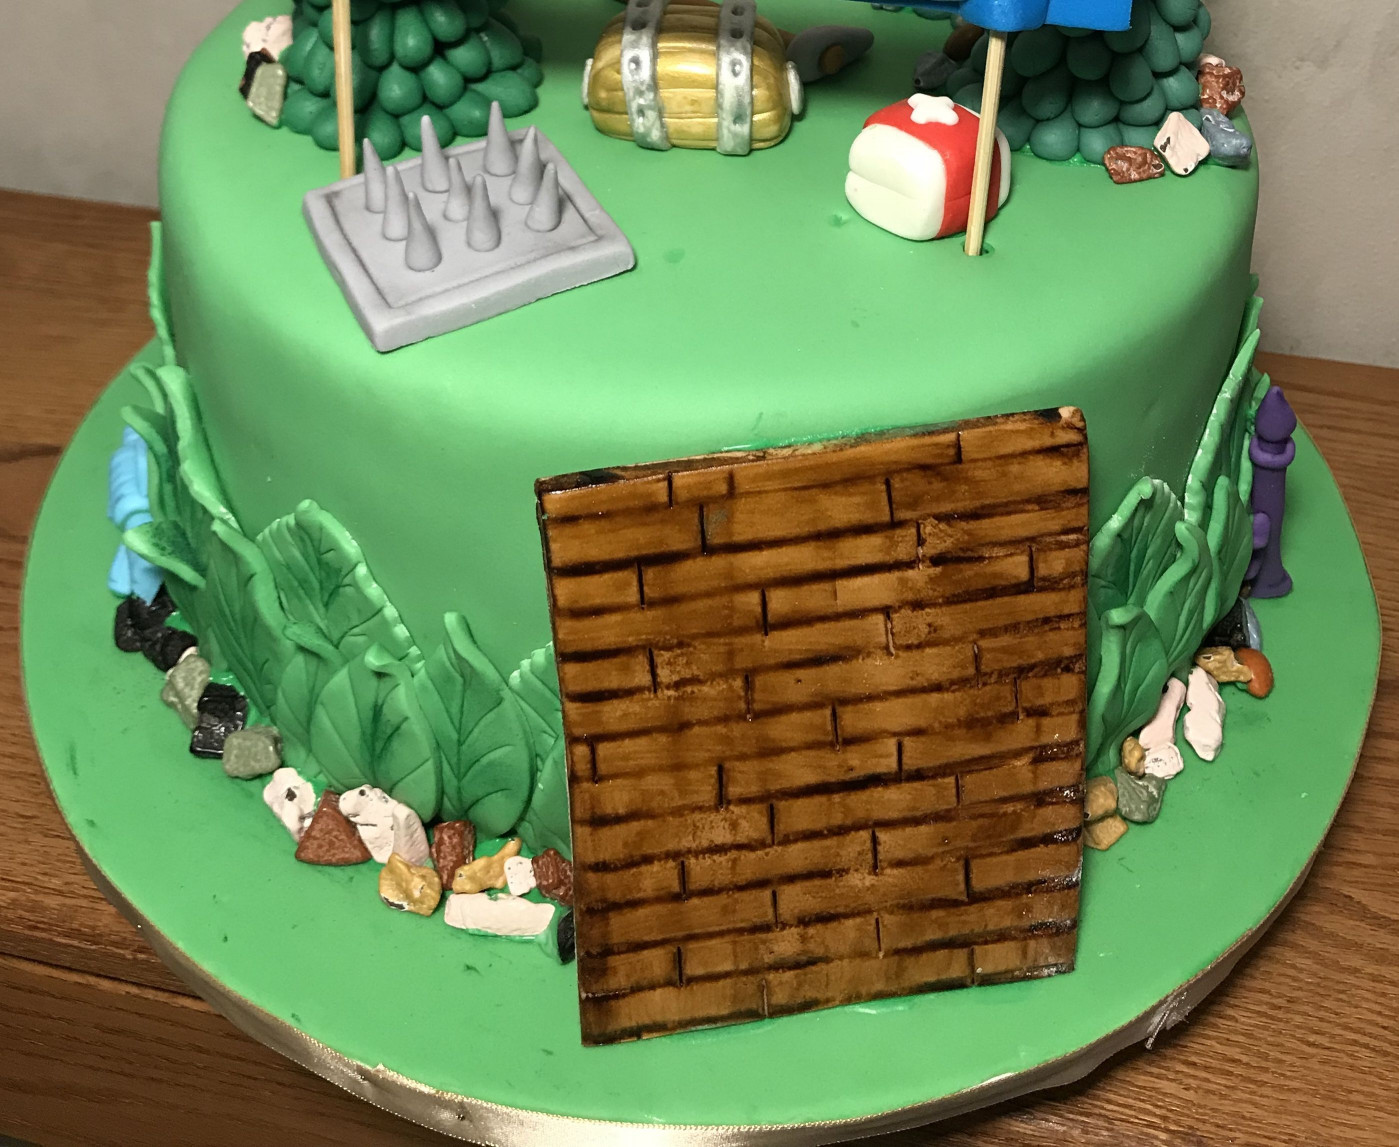 Birthday Cake Fortnite
 Fortnite cake side view Cakes by Carrie